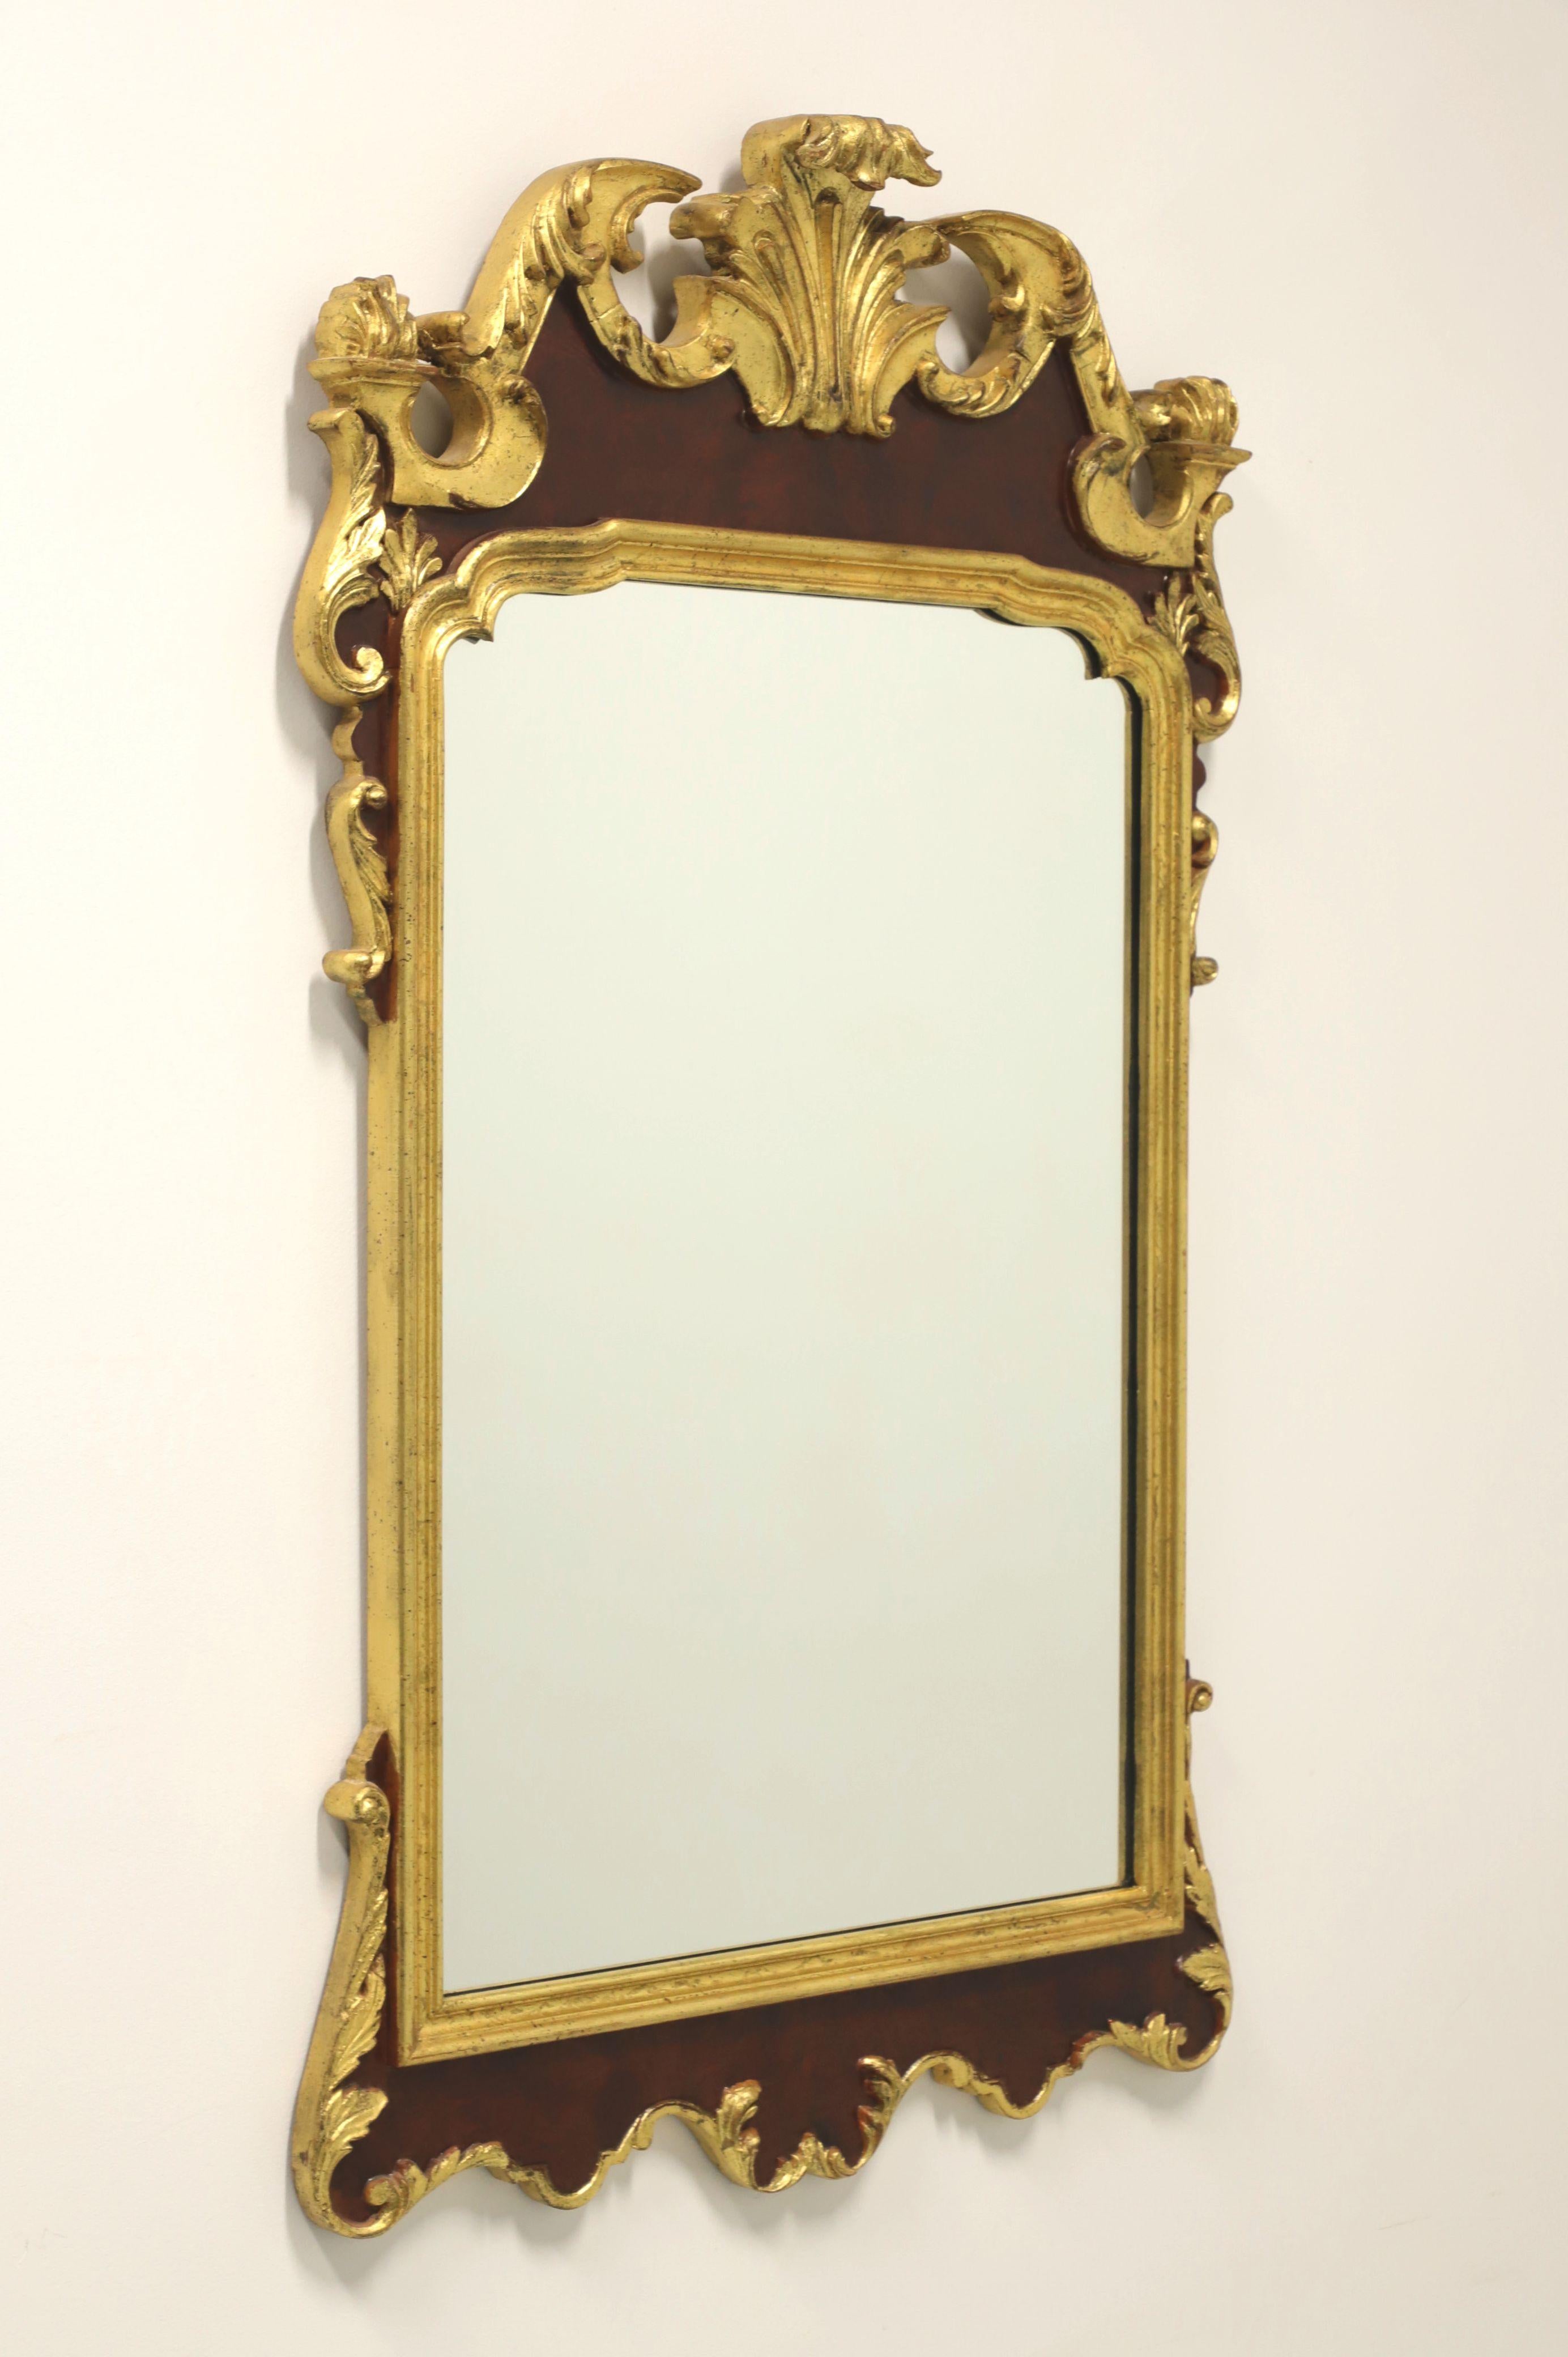 LABARGE Mahogany Gold Gilt French Provincial Style Wall Mirror For Sale 5